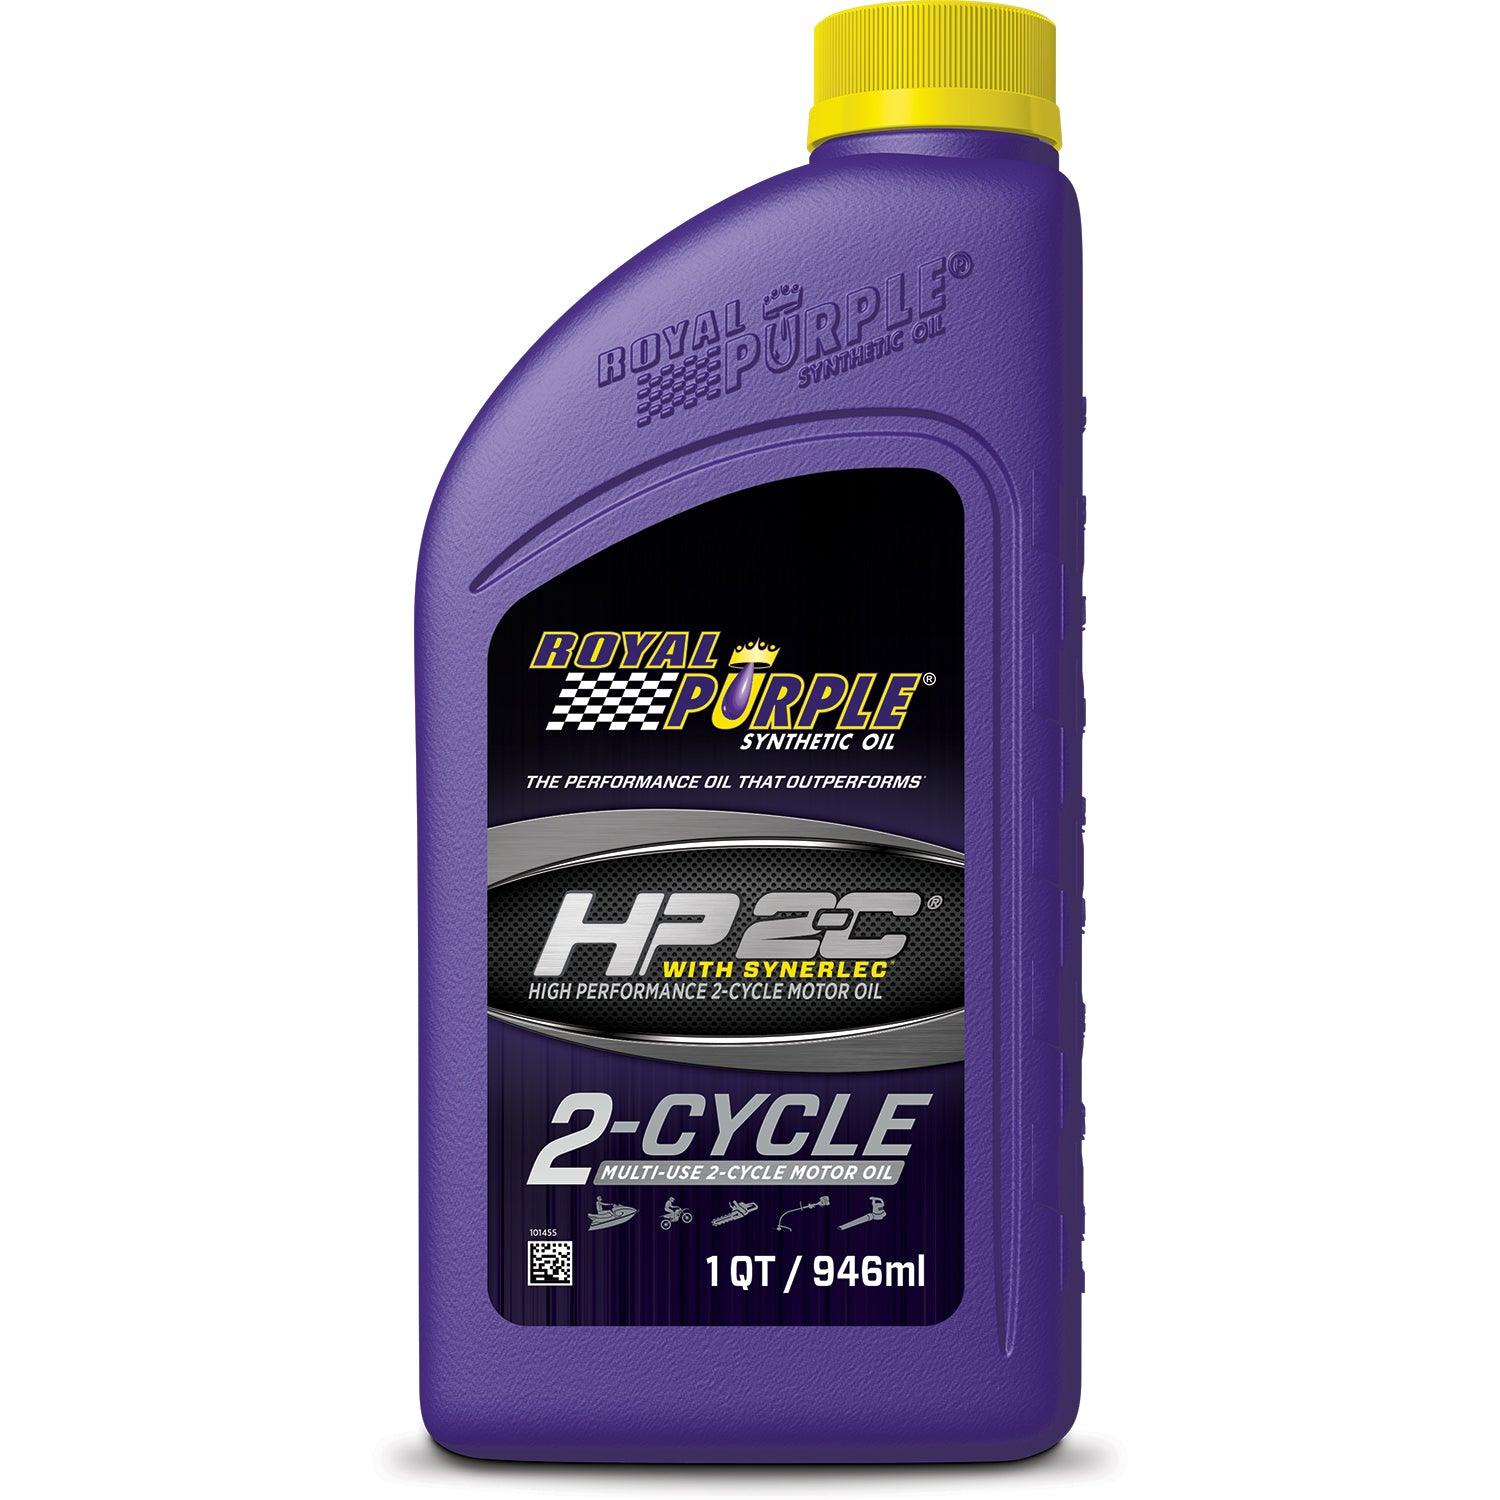 2 Cycle HP2C Motor Oil 1 Quart - Burlile Performance Products